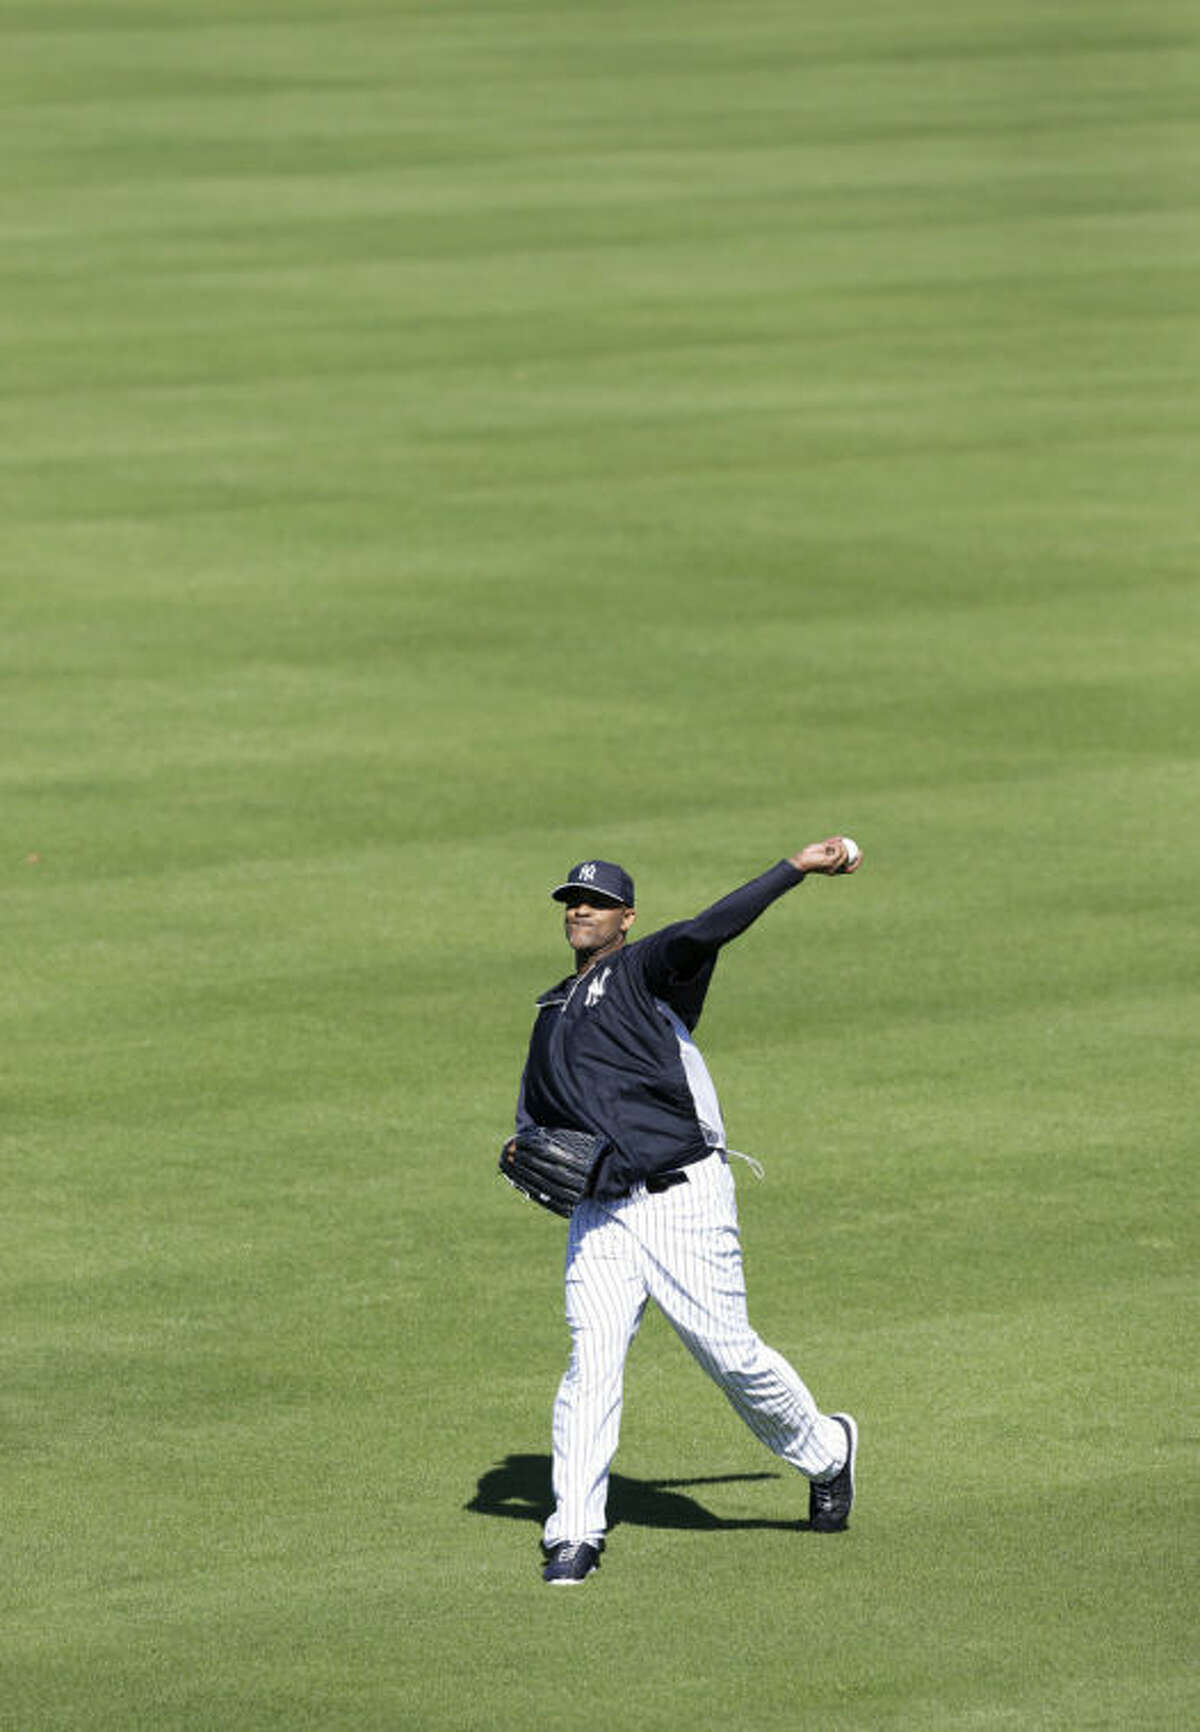 New York Yankees starting pitcher CC Sabathia throws in the outfield during spring training baseball practice Friday, Feb. 14, 2014, in Tampa, Fla. (AP Photo/Charlie Neibergall)